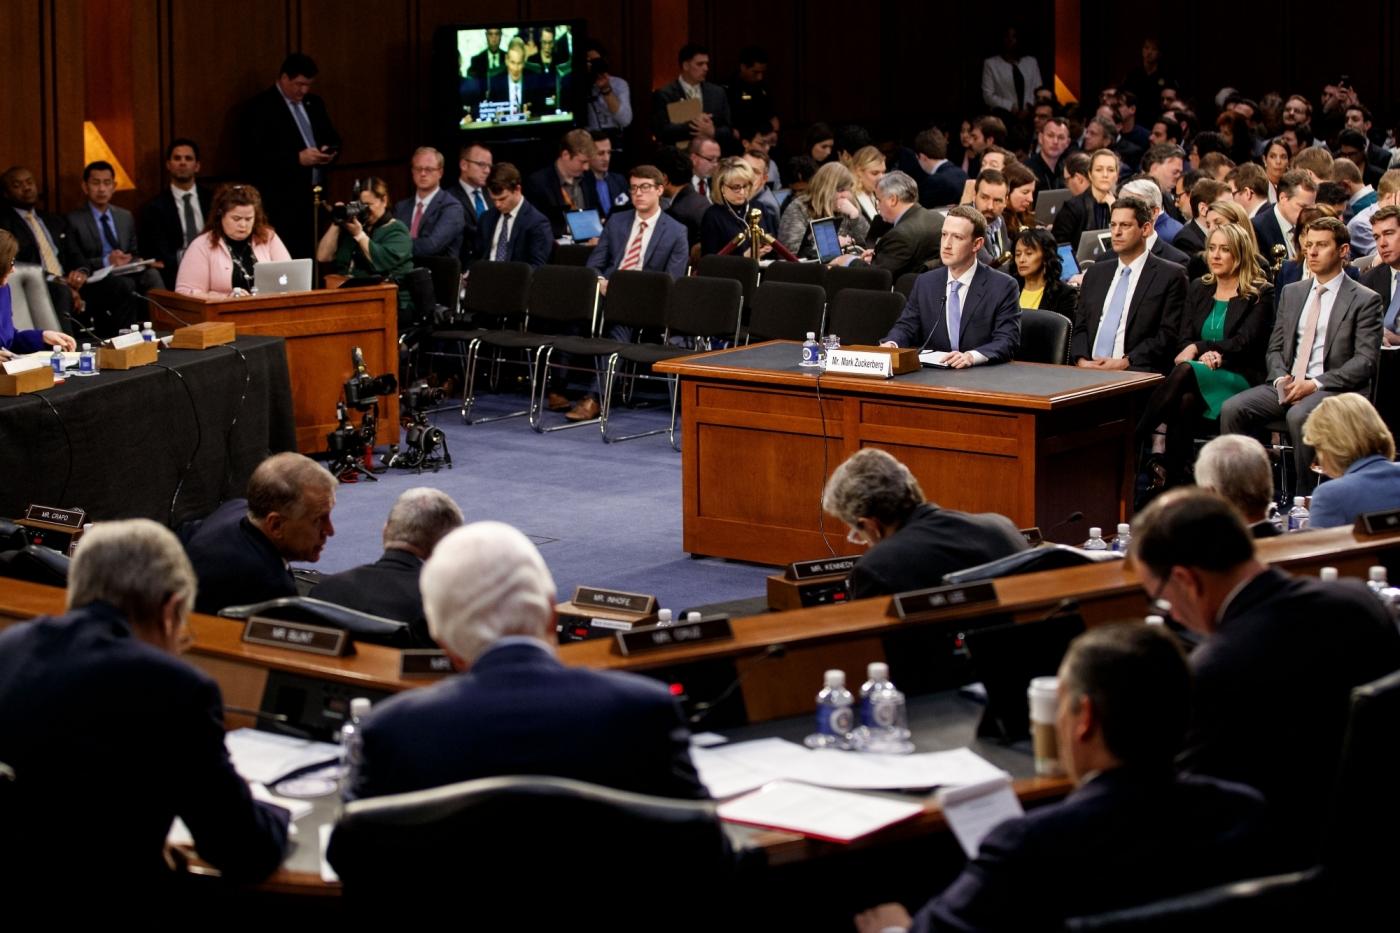 WASHINGTON, April 10, 2018 (Xinhua) -- Facebook CEO Mark Zuckerberg testifies at a joint hearing of the Senate Judiciary and Commerce committees on Capitol Hill in Washington D.C., United States, on April 10, 2018. Facebook CEO Mark Zuckerberg told Congress in written testimony on Monday that he is "responsible for" not preventing the social media platform from being used for harm, including fake news, foreign interference in elections and hate speech. (Xinhua/Ting Shen/IANS) by . 